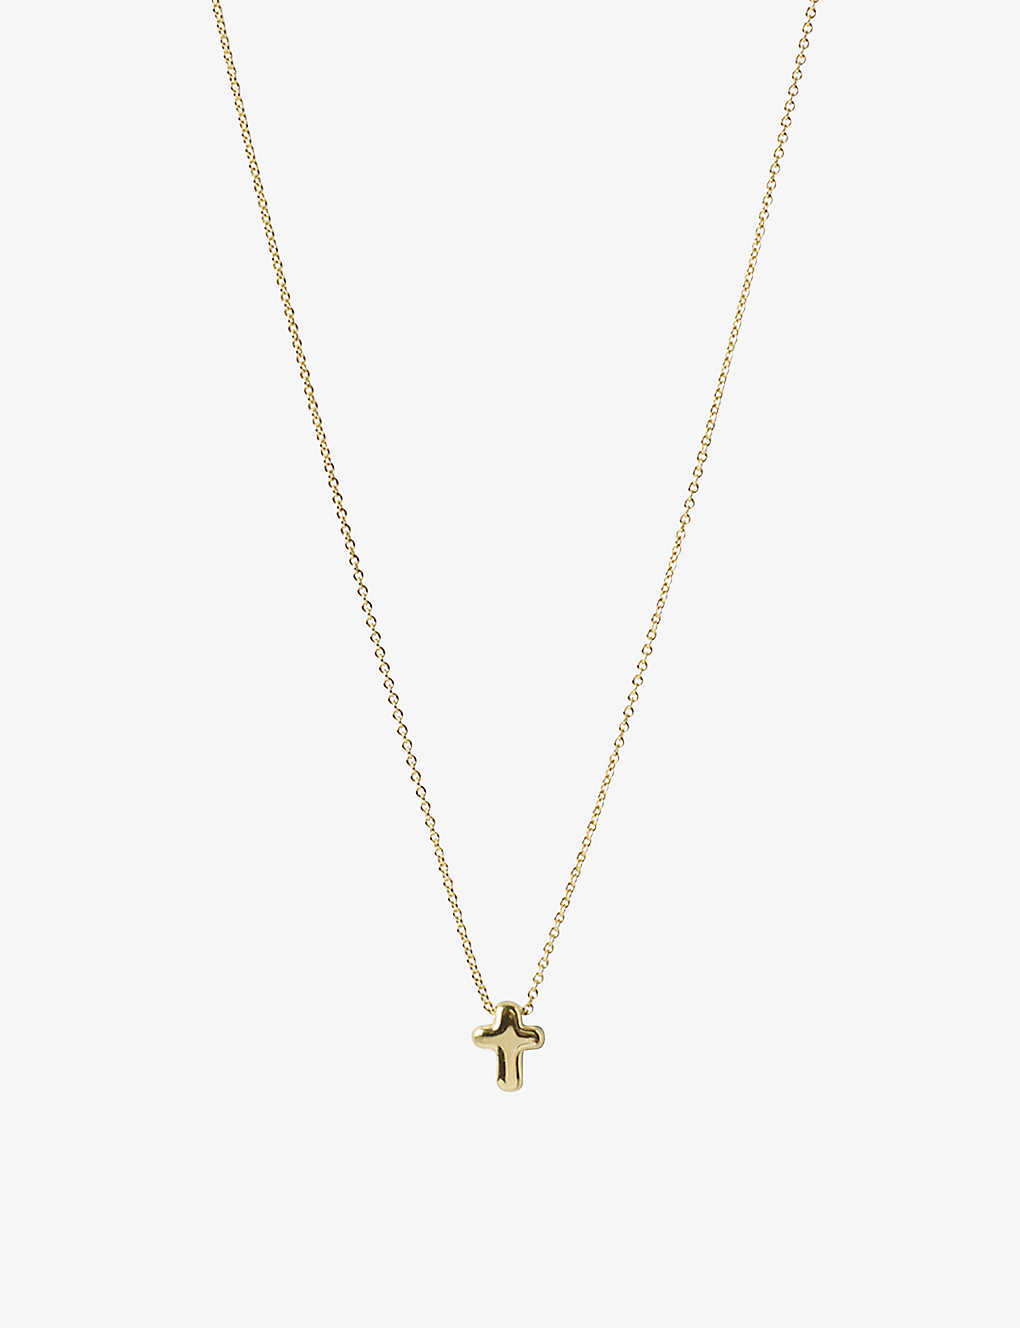 The Alkemistry Womens 18ct Yellow Gold Chubby Cross 18ct Yellow-gold Pendant Necklace